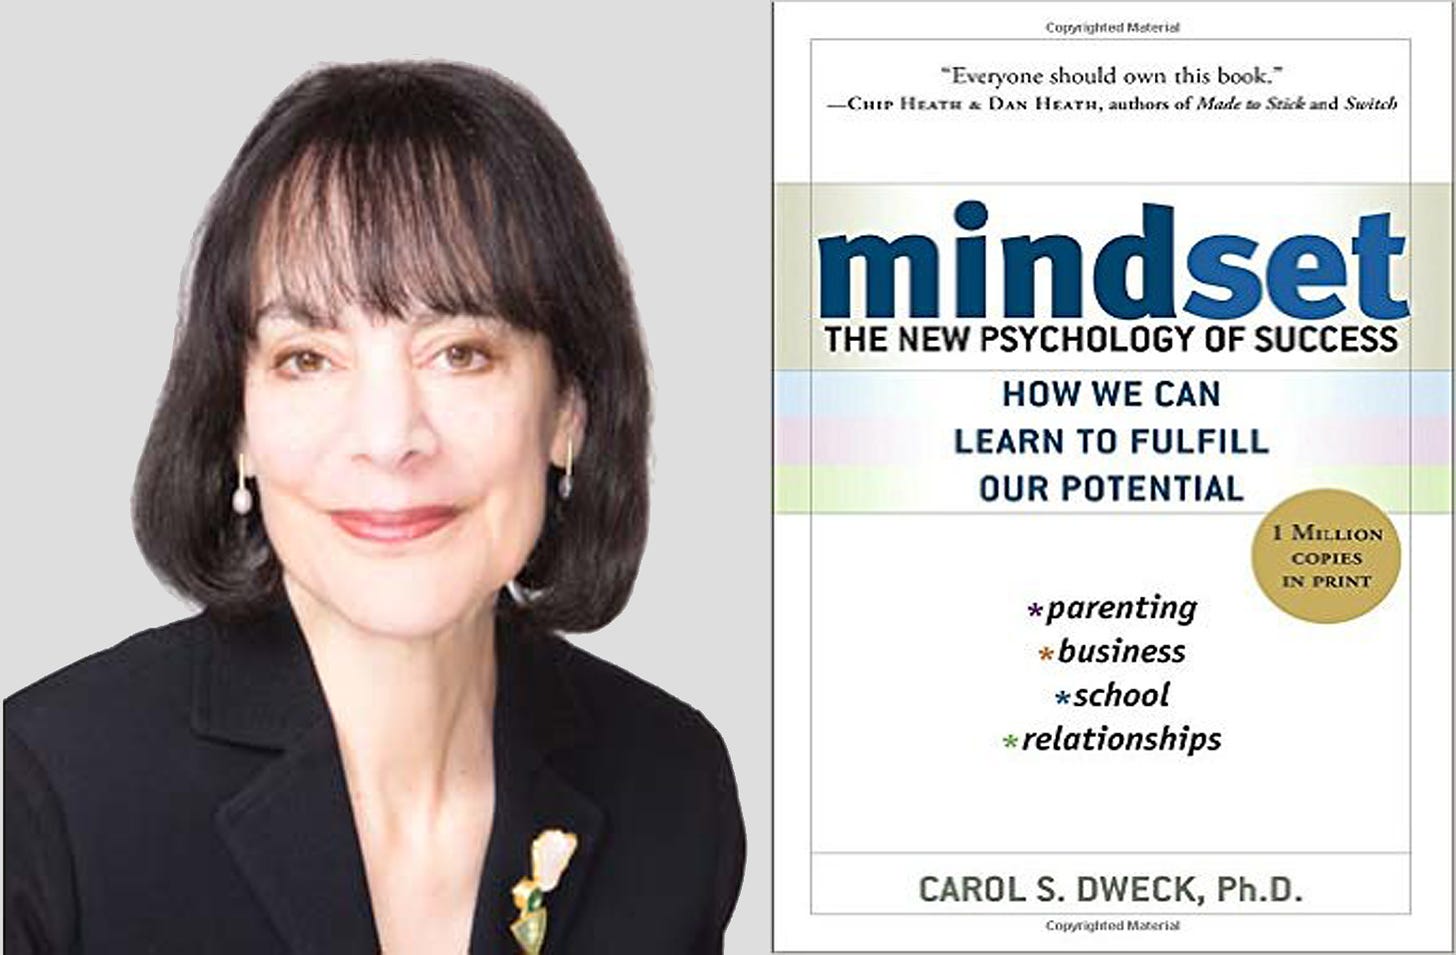 Fixed and growth mindset by carol s dweck | charlescalsucarpa1986's Ownd